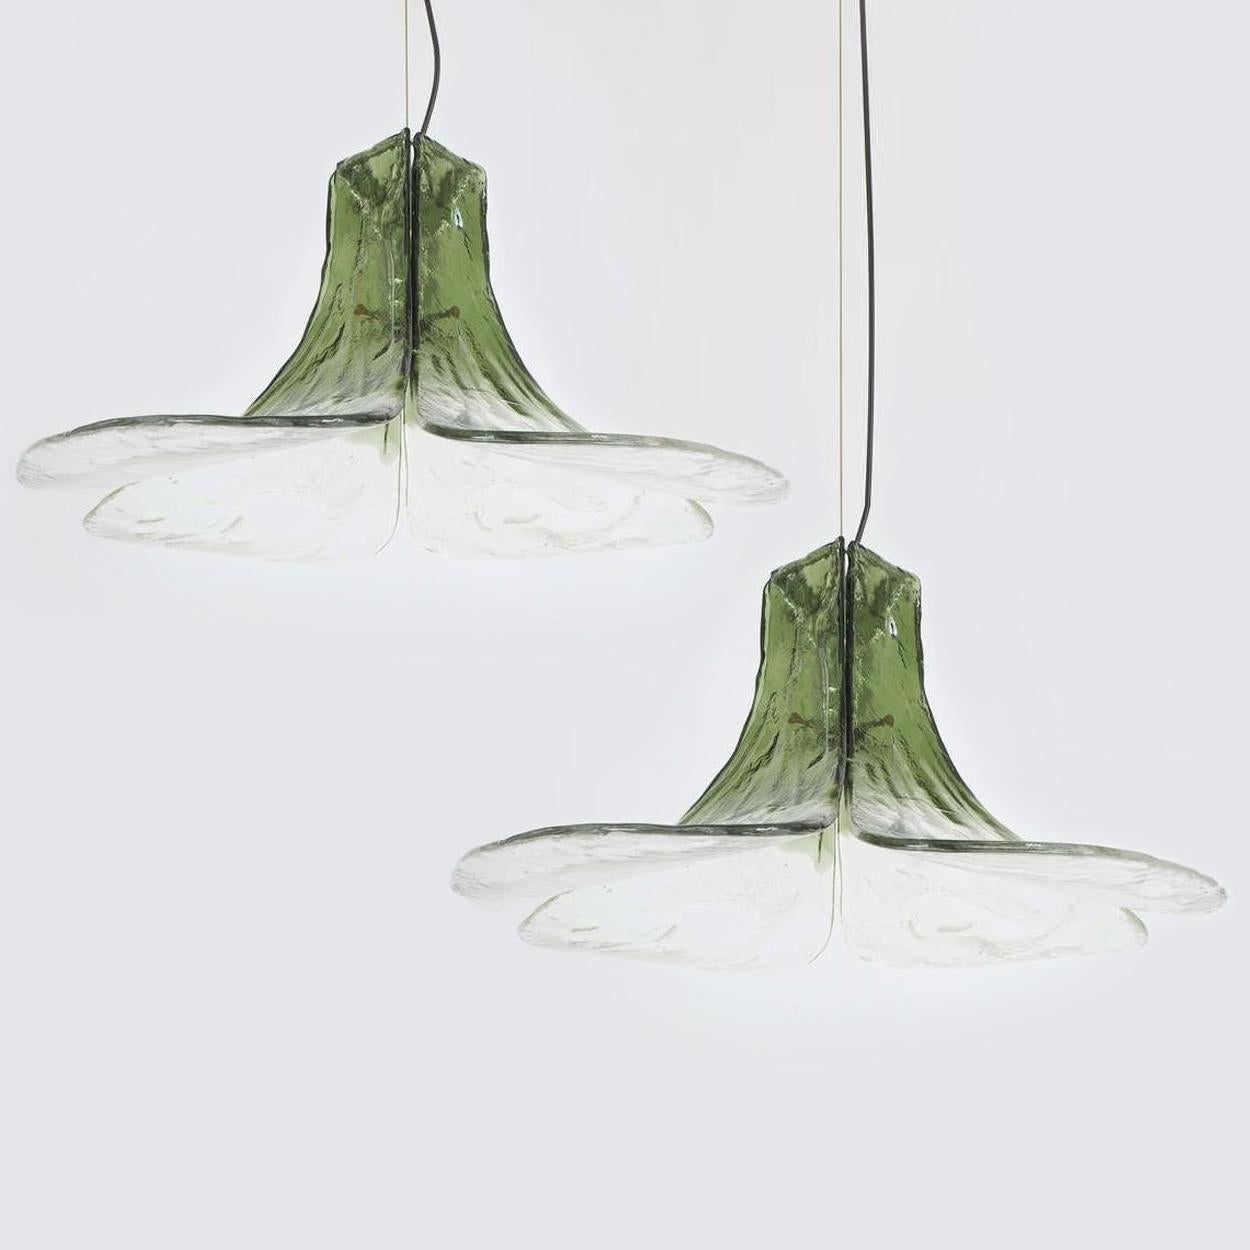 1 of the 2 Pendant Lamps Model LS185 by Carlo Nason for Mazzega 1